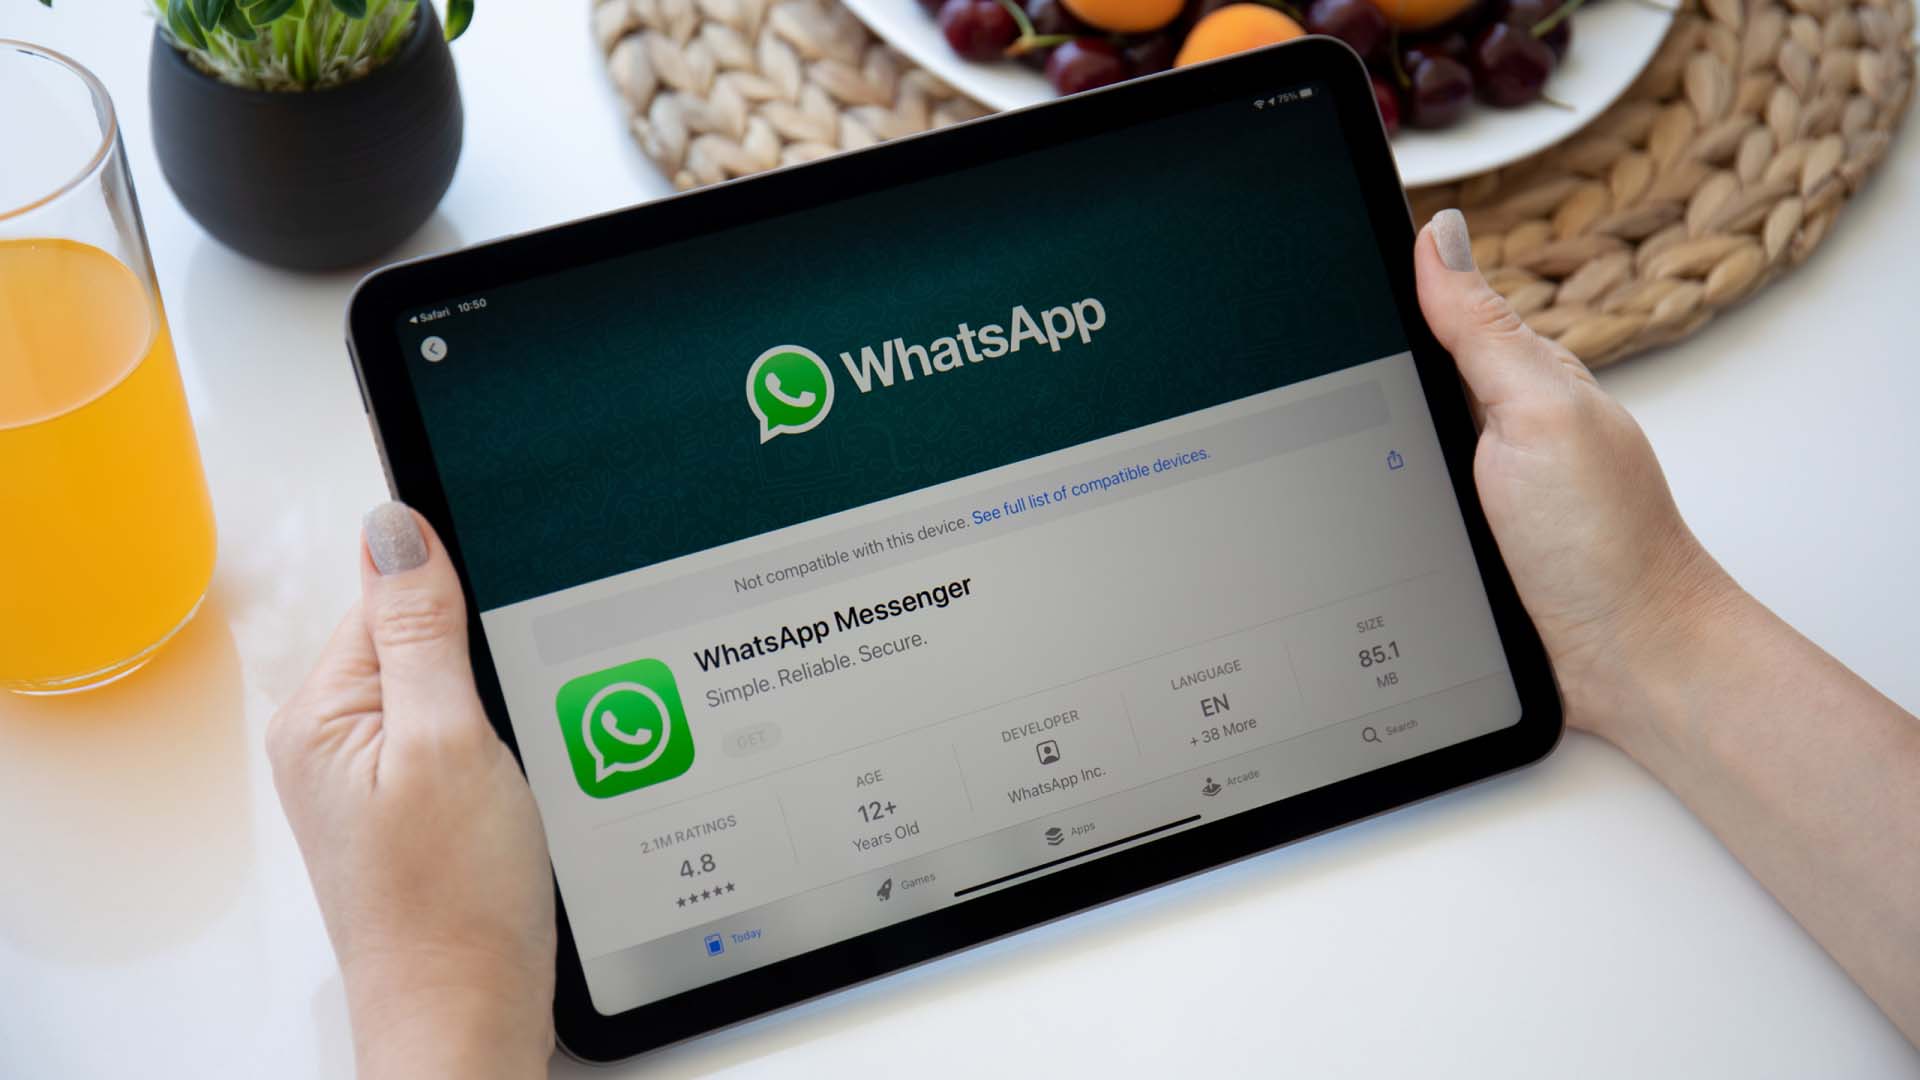 Image of WhatsApp on a tablet